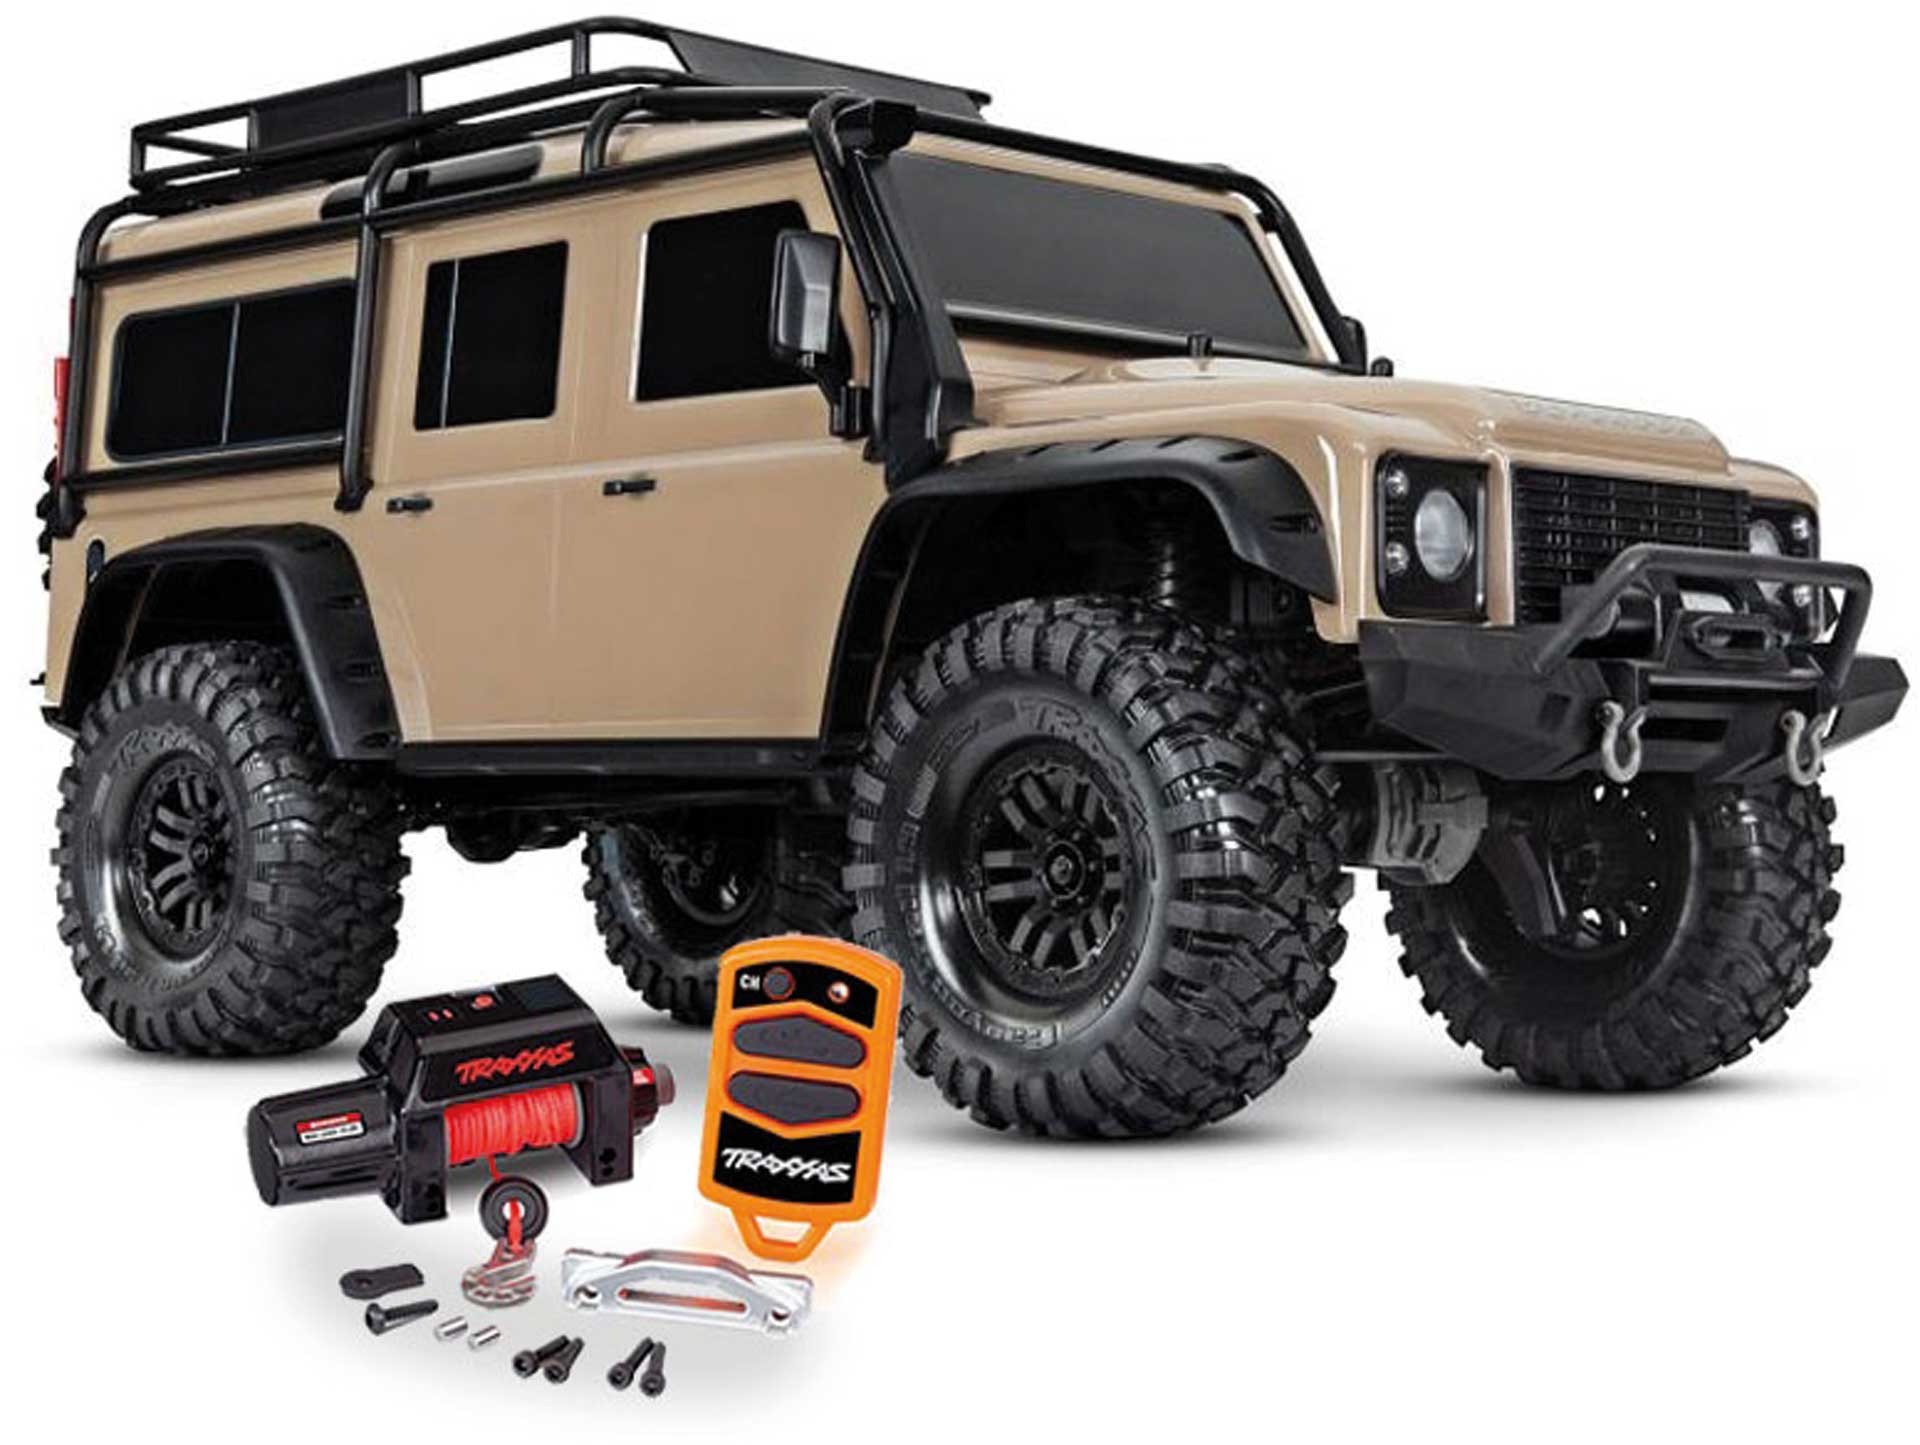 TRAXXAS TRX-4 Land Rover Defender Sand 1/10 4X4 RTR Scale Crawler Brushed mit Seilwinde